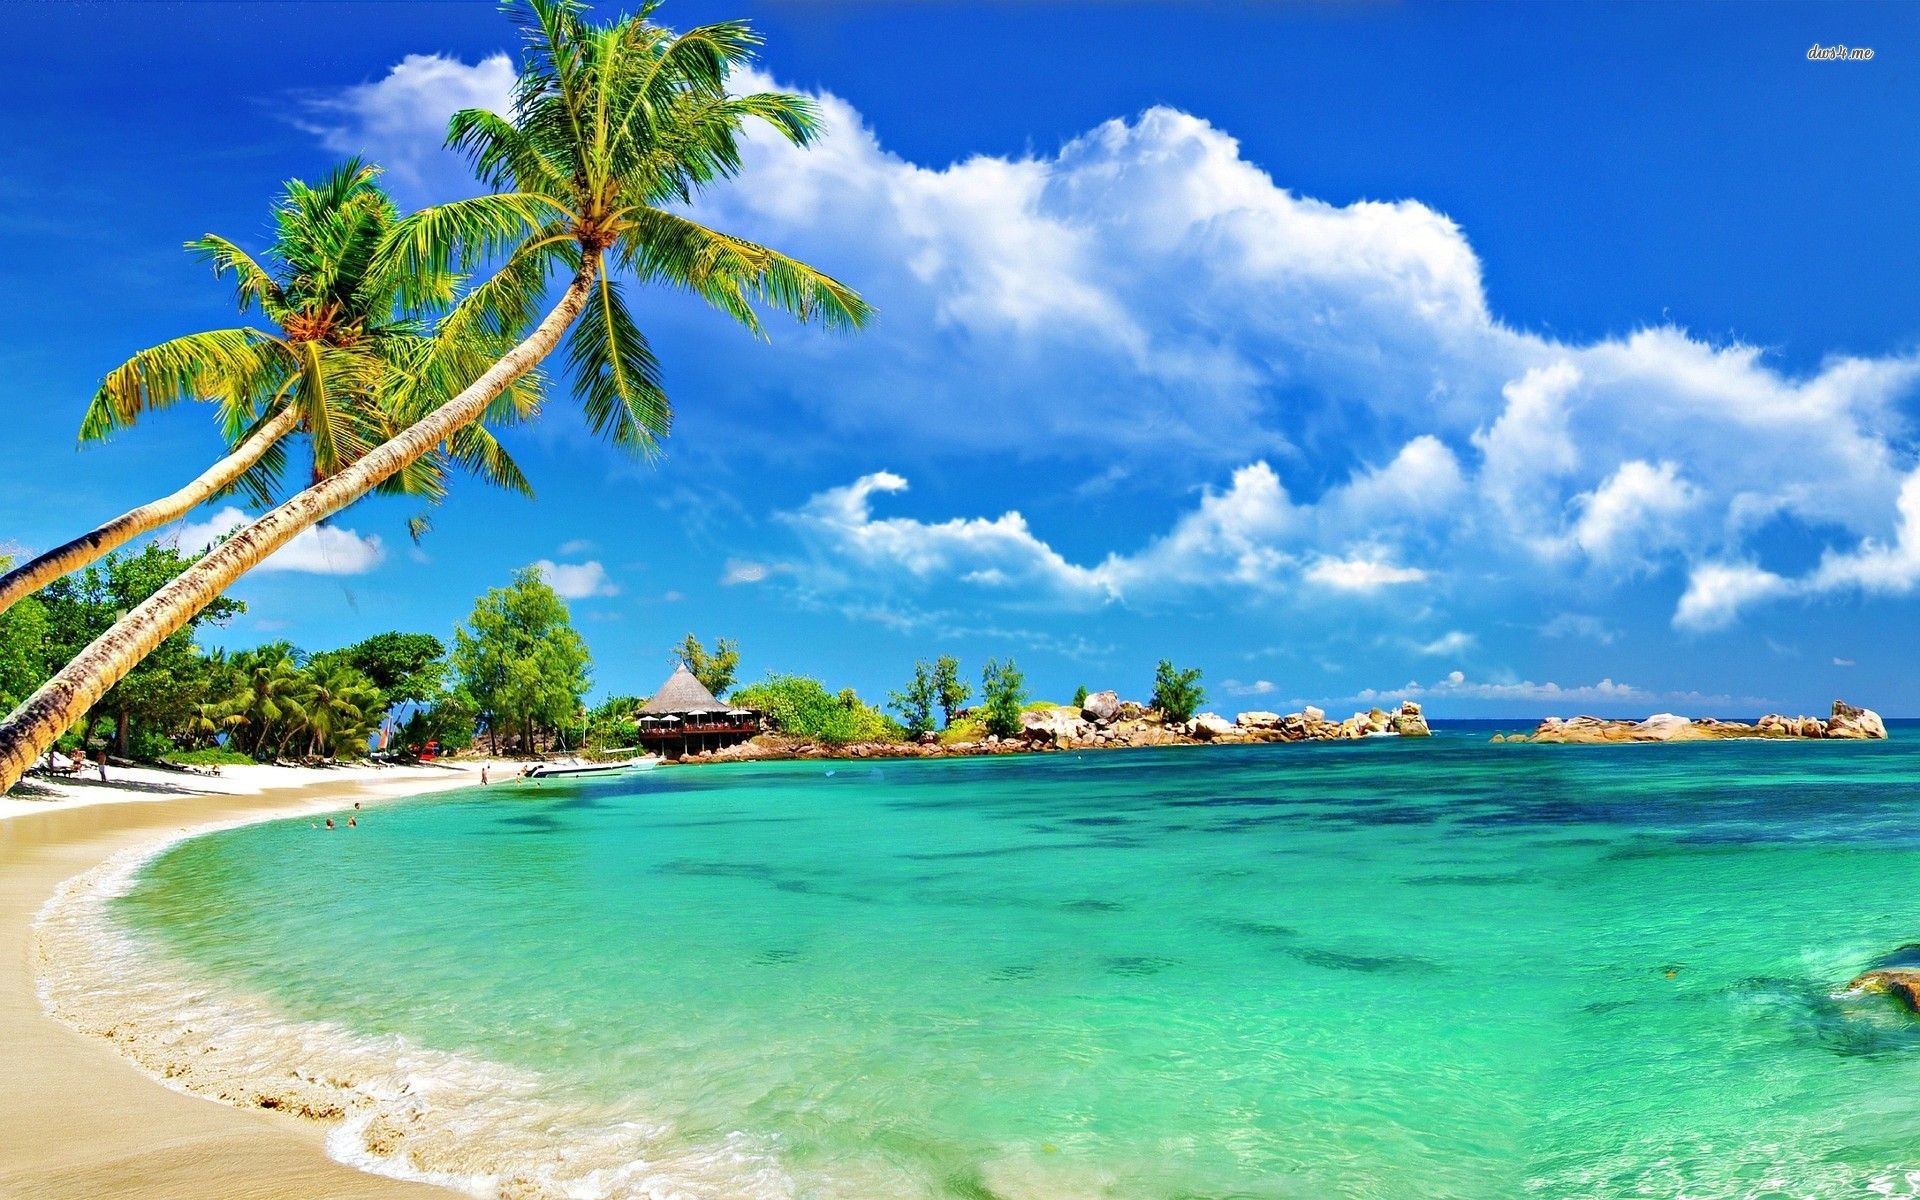 Cool Tropical Backgrounds